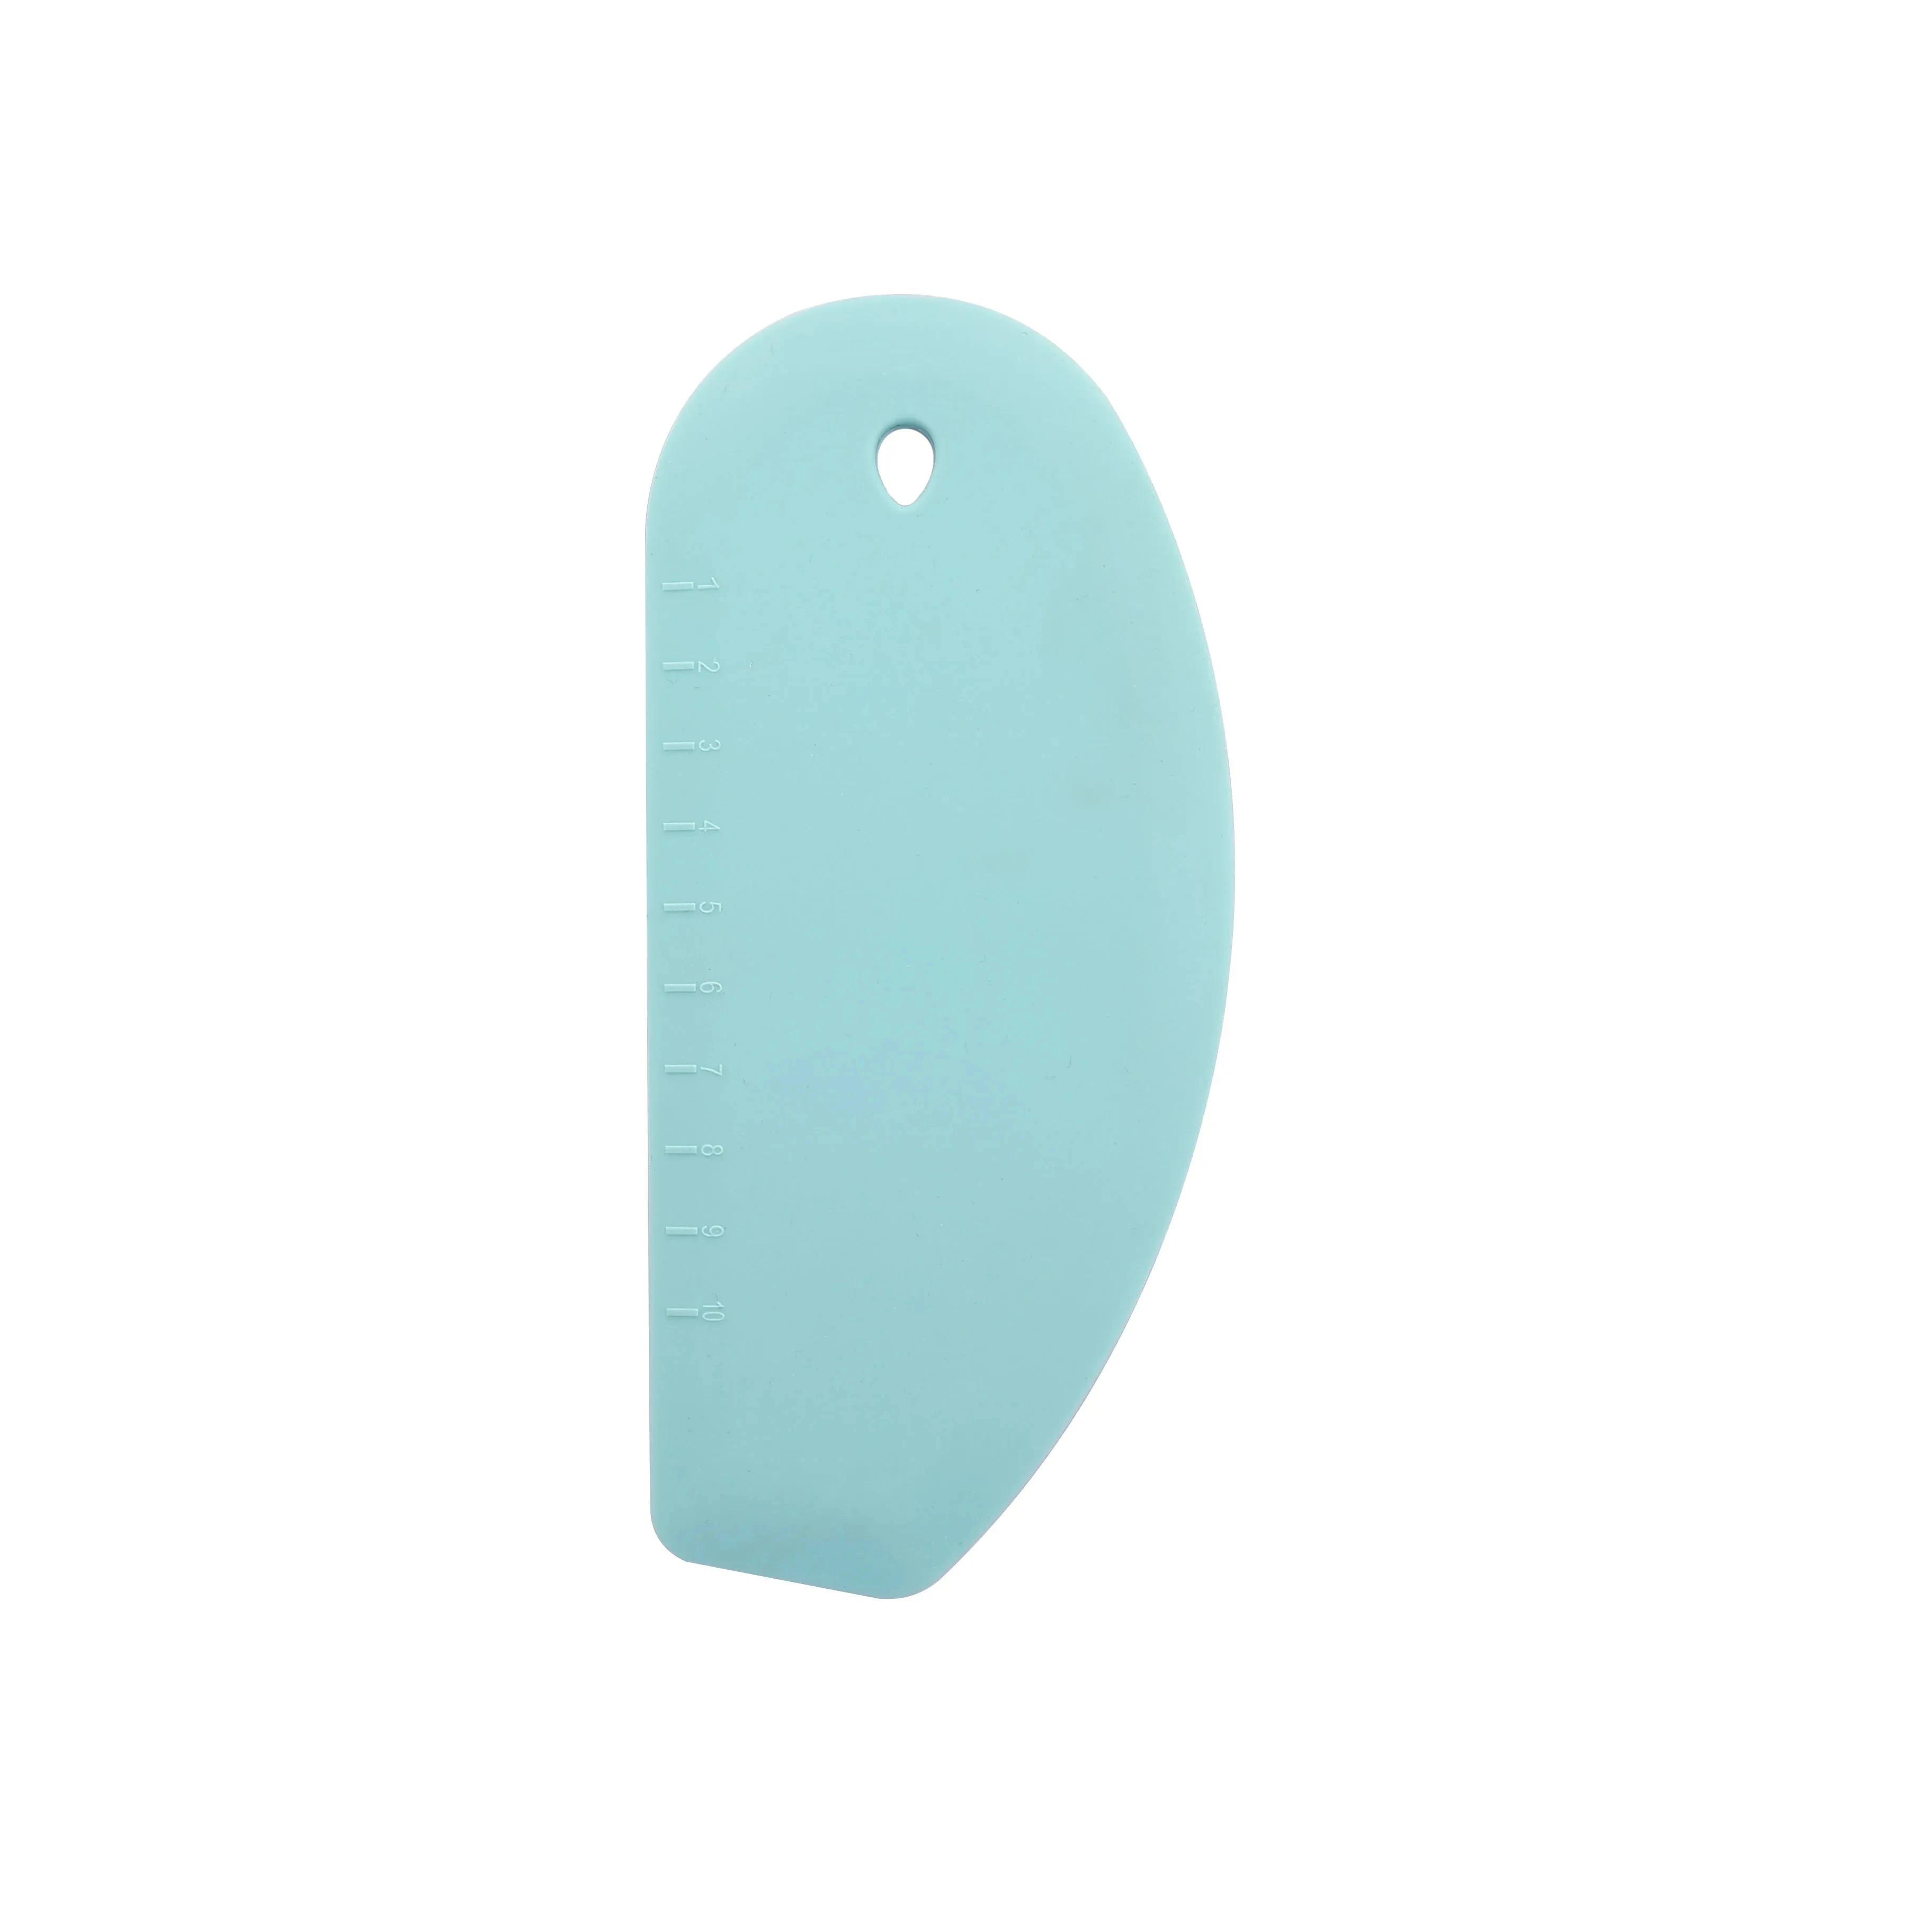 Card Cutter Blue Cake Icing Custom Bean Shape Pastry Bench Scoop Customized Smoother Tool Set Cake Baking Silicone Dough Scraper